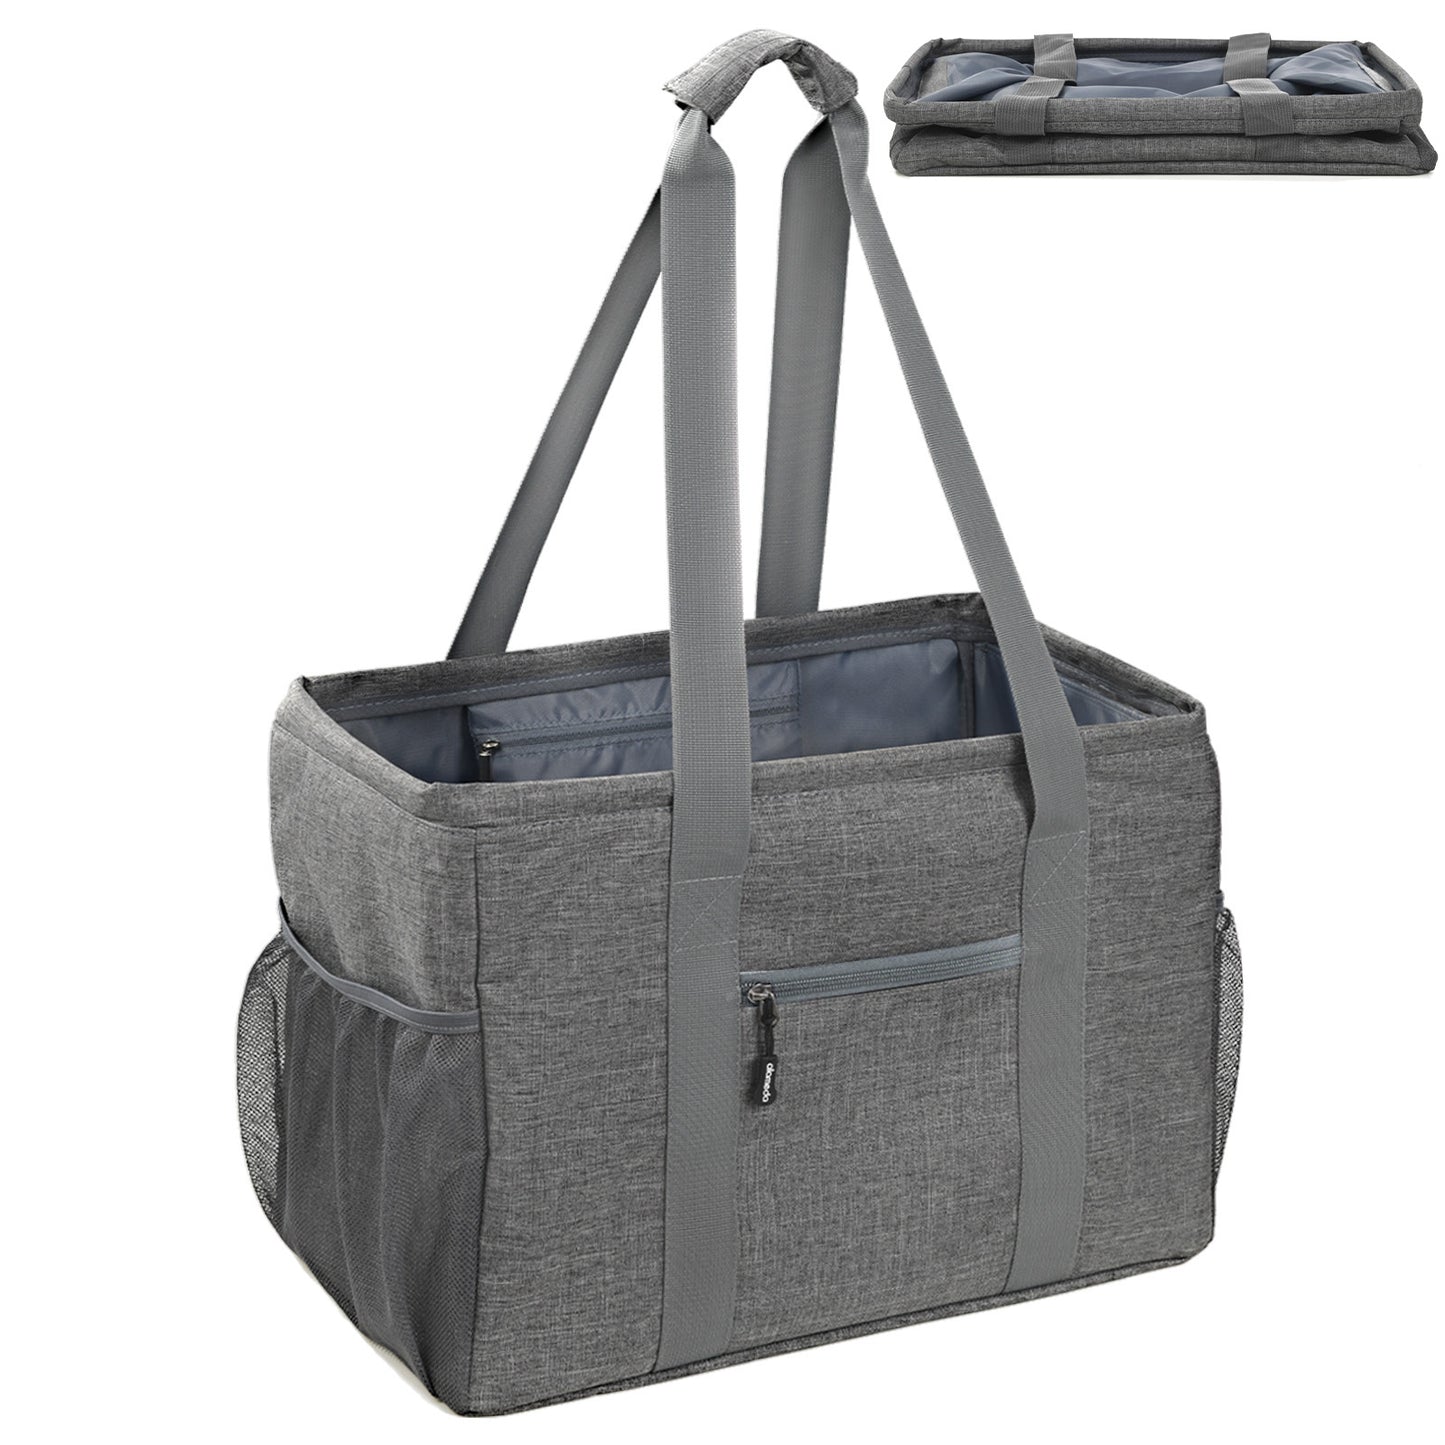 Alameda Standing Large Utility Tote Bag with Metal Wire Frame